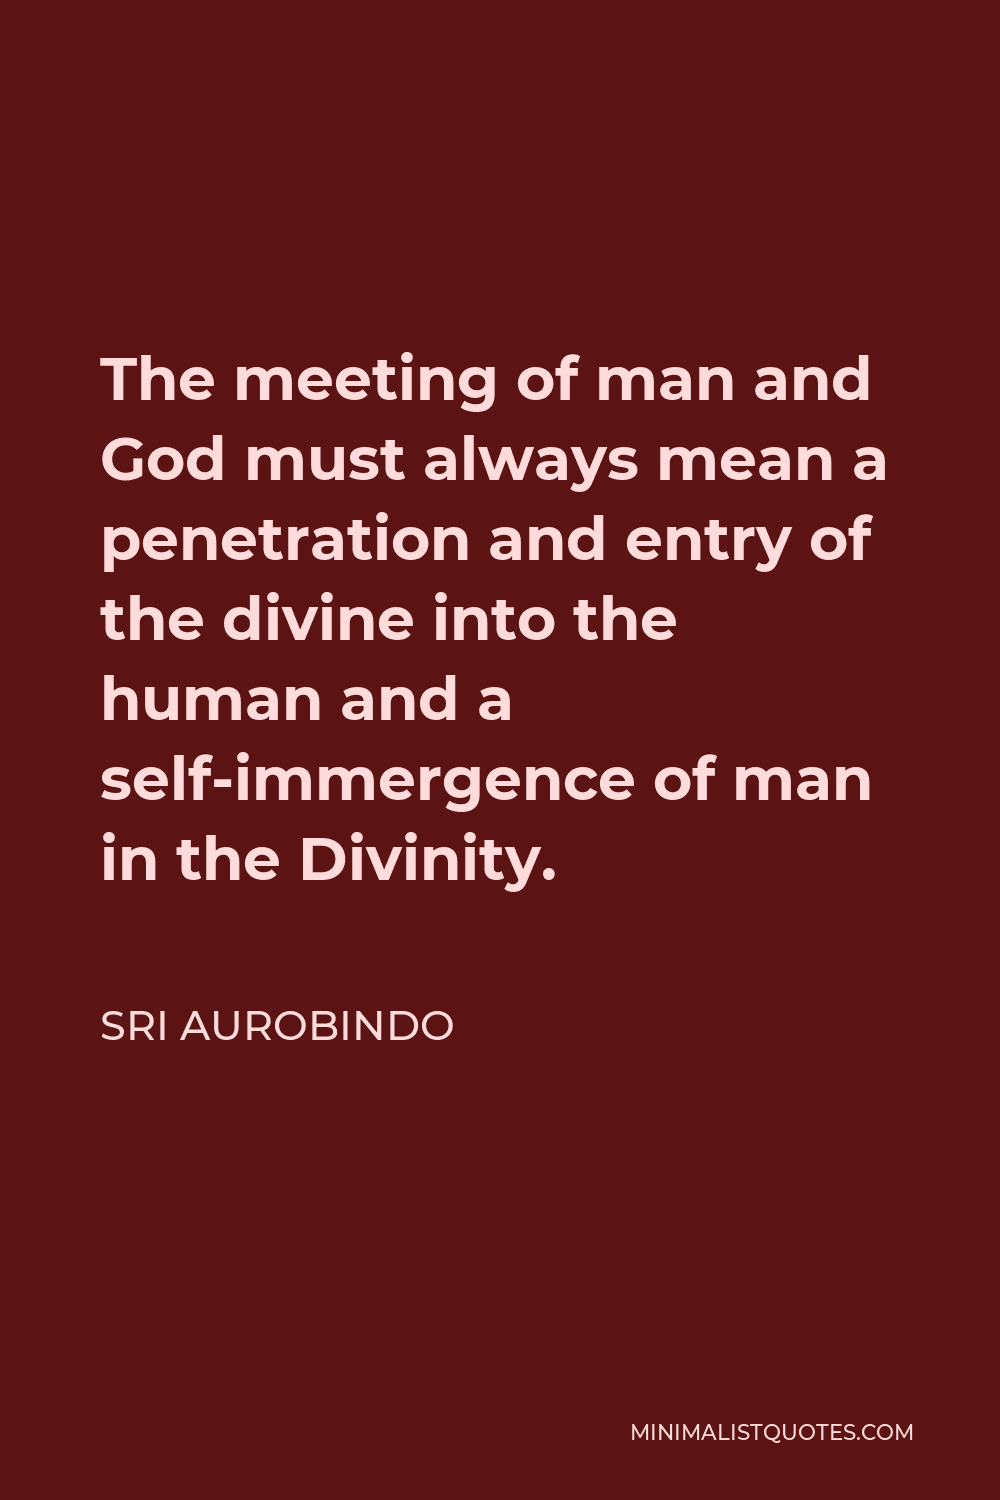 Sri Aurobindo Quote - The meeting of man and God must always mean a penetration and entry of the divine into the human and a self-immergence of man in the Divinity.